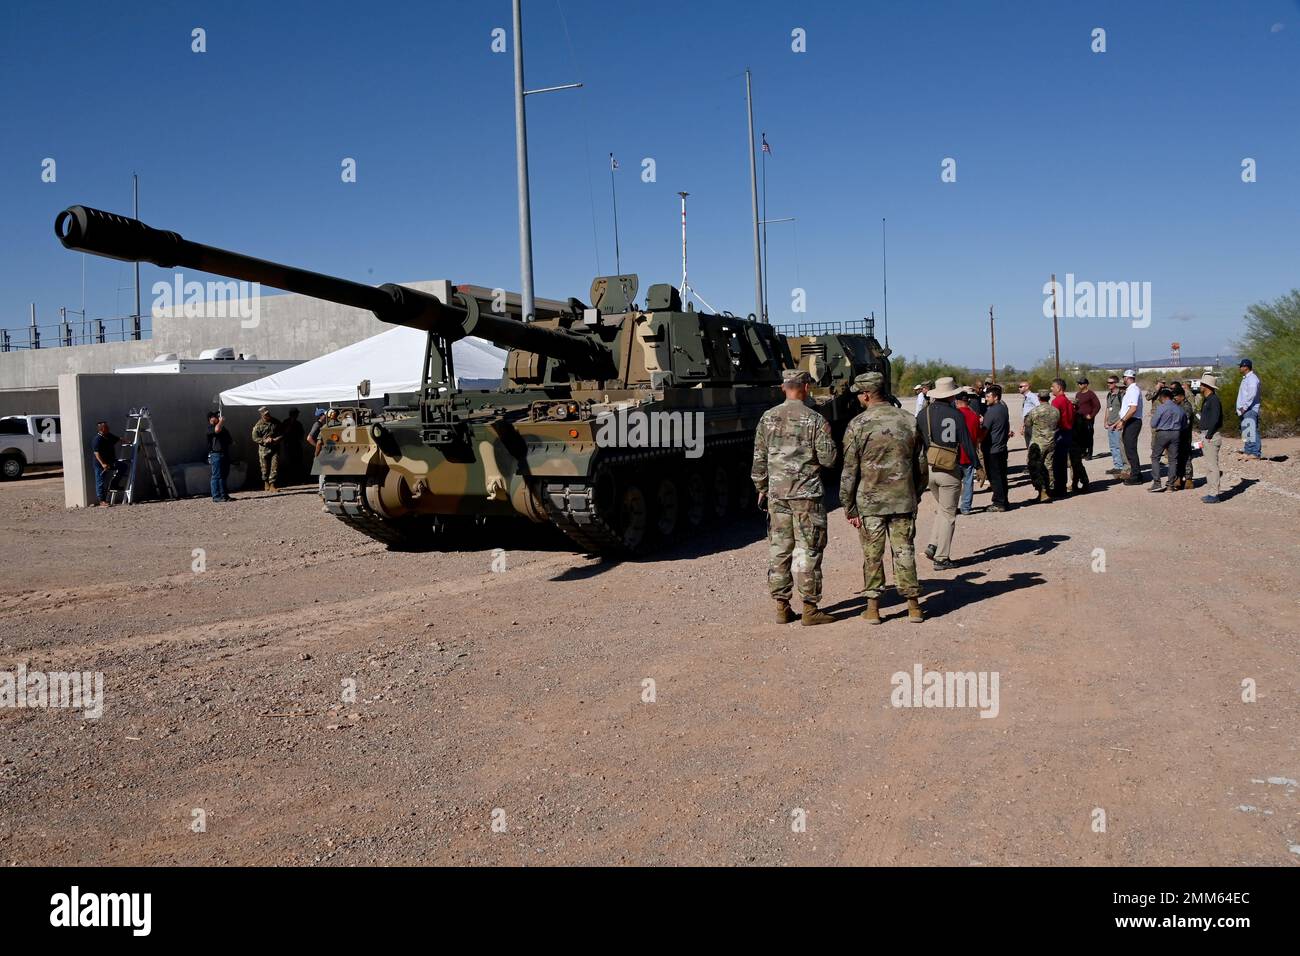 In mid-September, YPG hosted a demonstration showcasing the use of the United States’ most cutting edge 155mm artillery munitions with the South Korean K9A1 Thunder Self-Propelled Howitzer and K10 Ammunition Resupply Vehicle (ARV). On the demonstration day, about 60 visitors from across the Army and several friendly foreign nations observed the K9A1 undergo loading from the K10 and then embark on multiple realistic fire missions across two adjacent gun positions. Stock Photo